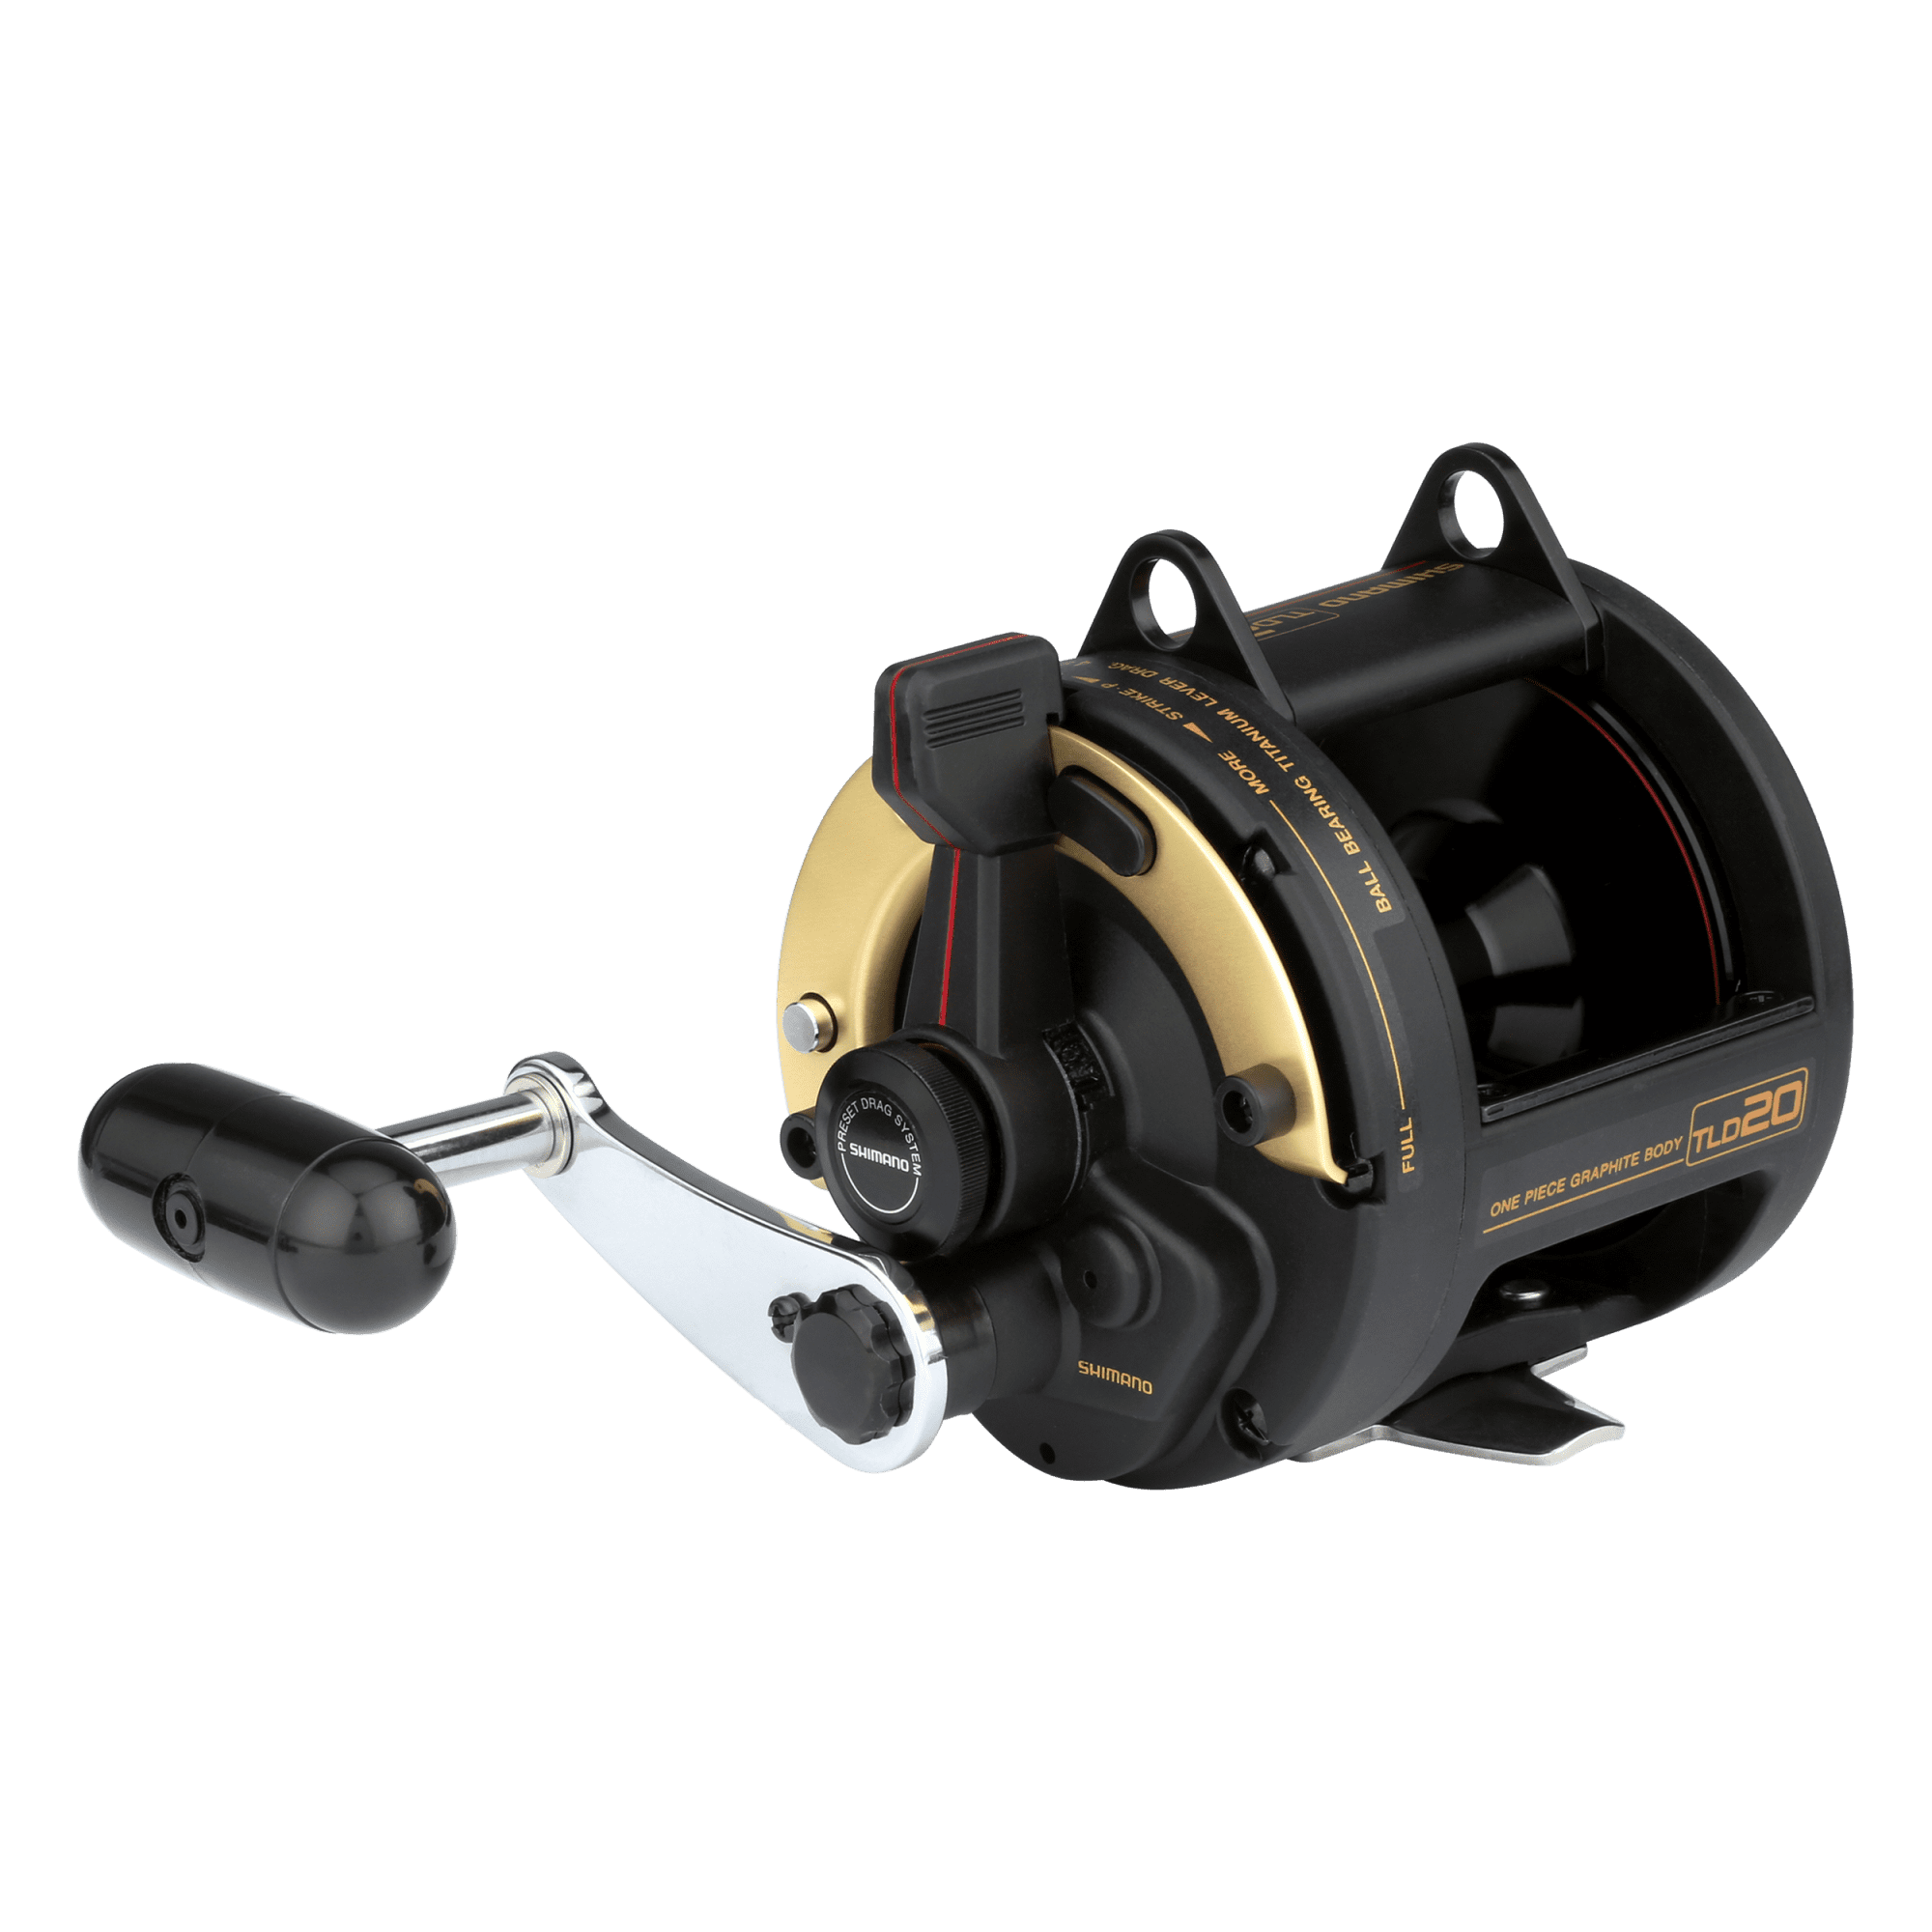 Shimano Fishing TLD20 TRITON LEVER DRG Conventional Reels [TLD20] 